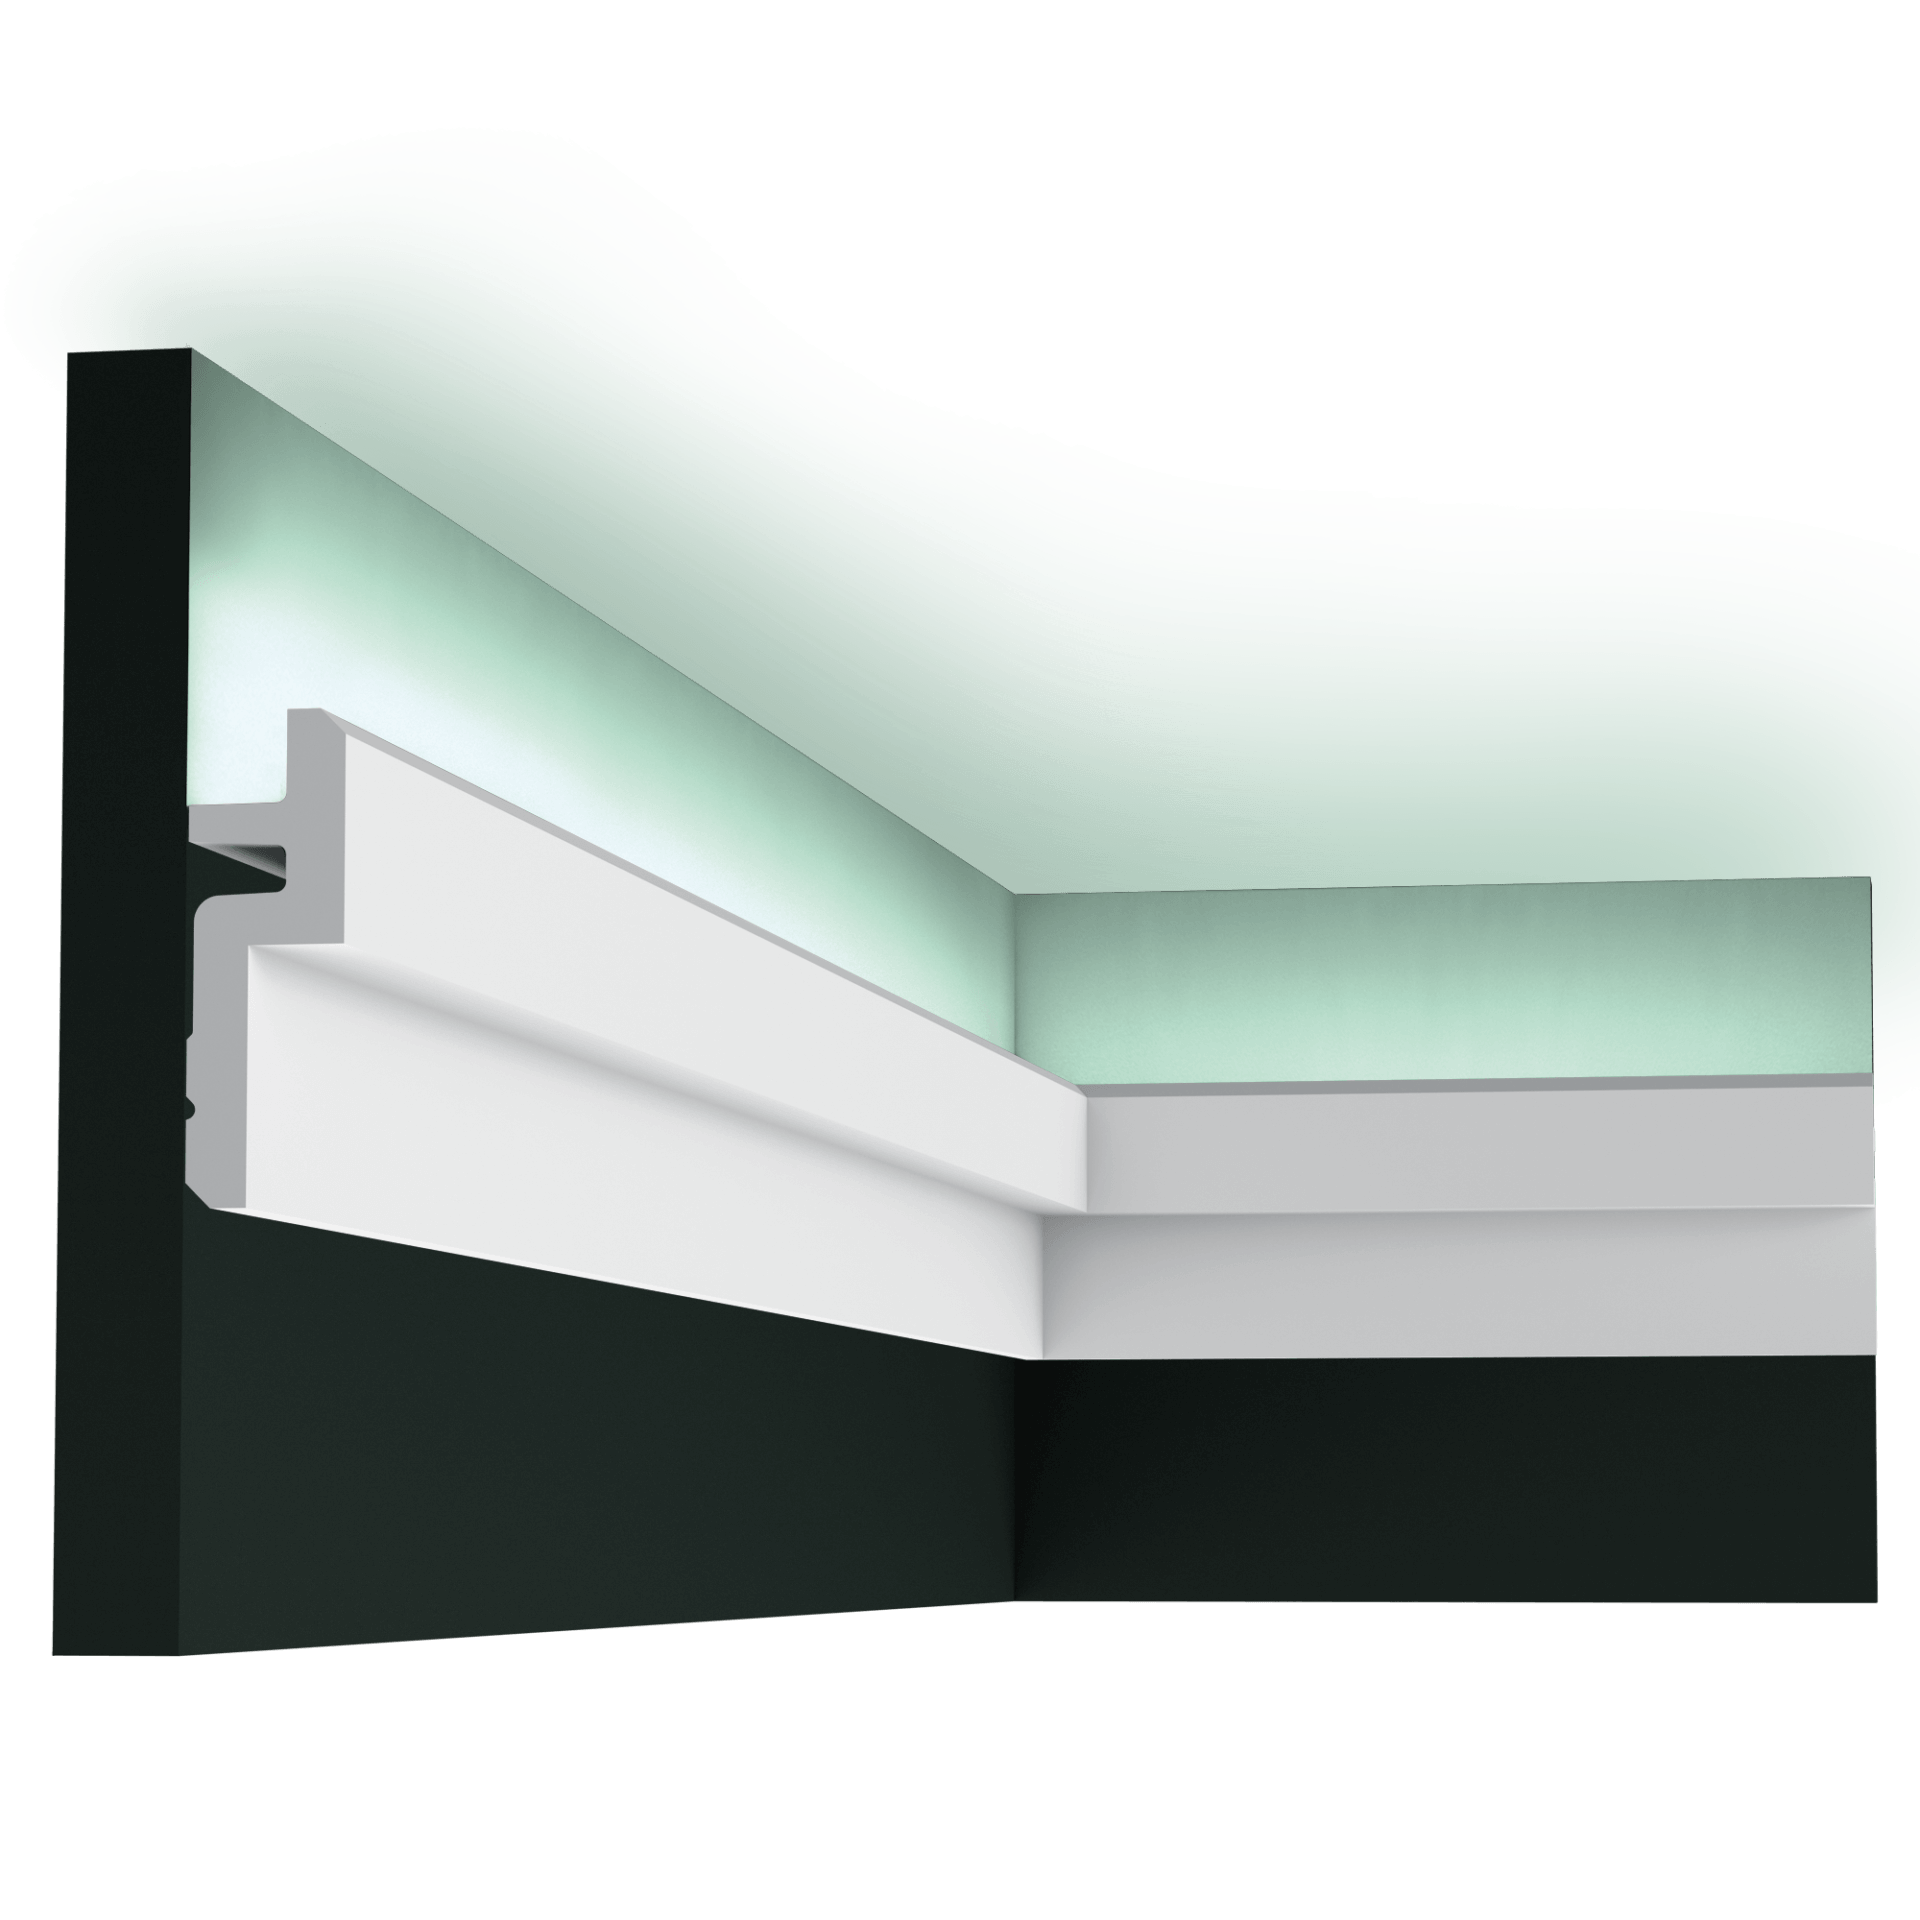 c394 uplighter 3c20 This clean, modern profile from the Steps range can also be used to conceal LED lighting. The angled corners above and below provide additional subtle shadow lines. Designed by Orio Tonini.